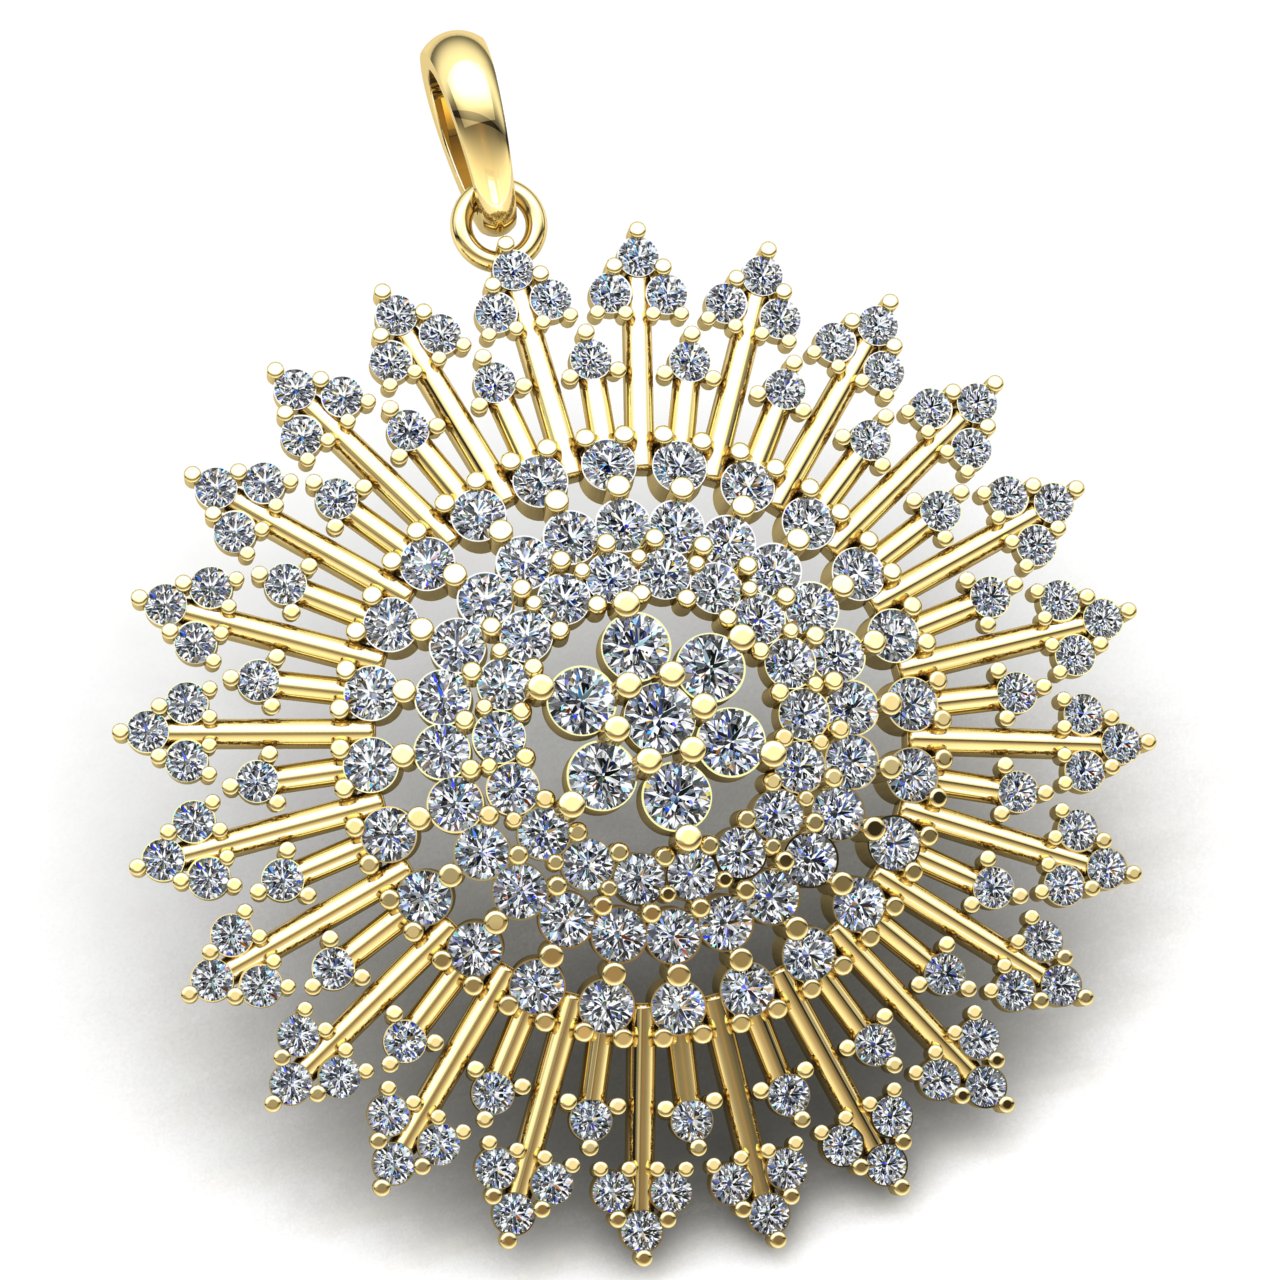 Jewel We Sell 8ctw Round Cut Diamond Ladies Fancy Halo Circle Pendant Solid 14K Yellow Gold GH SI2